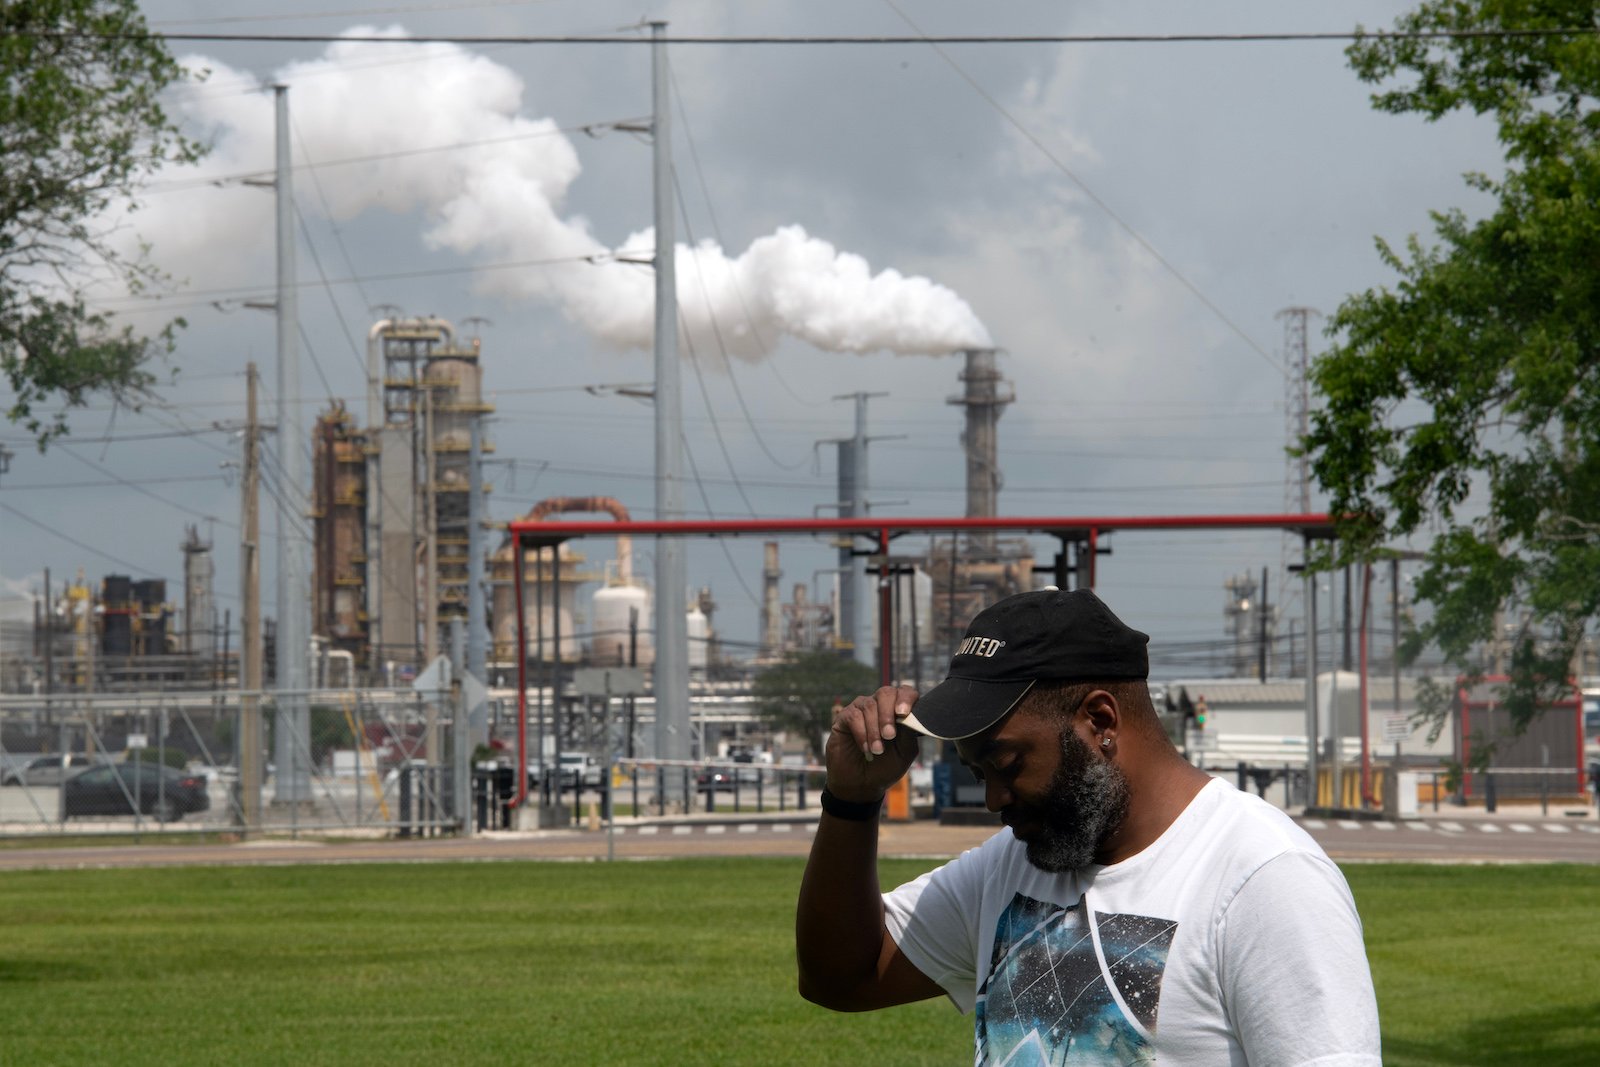 Christopher Jones, a Black man in a ball cap and t-shirt, poses with his head to the side and down, in front a steaming oil refinery.